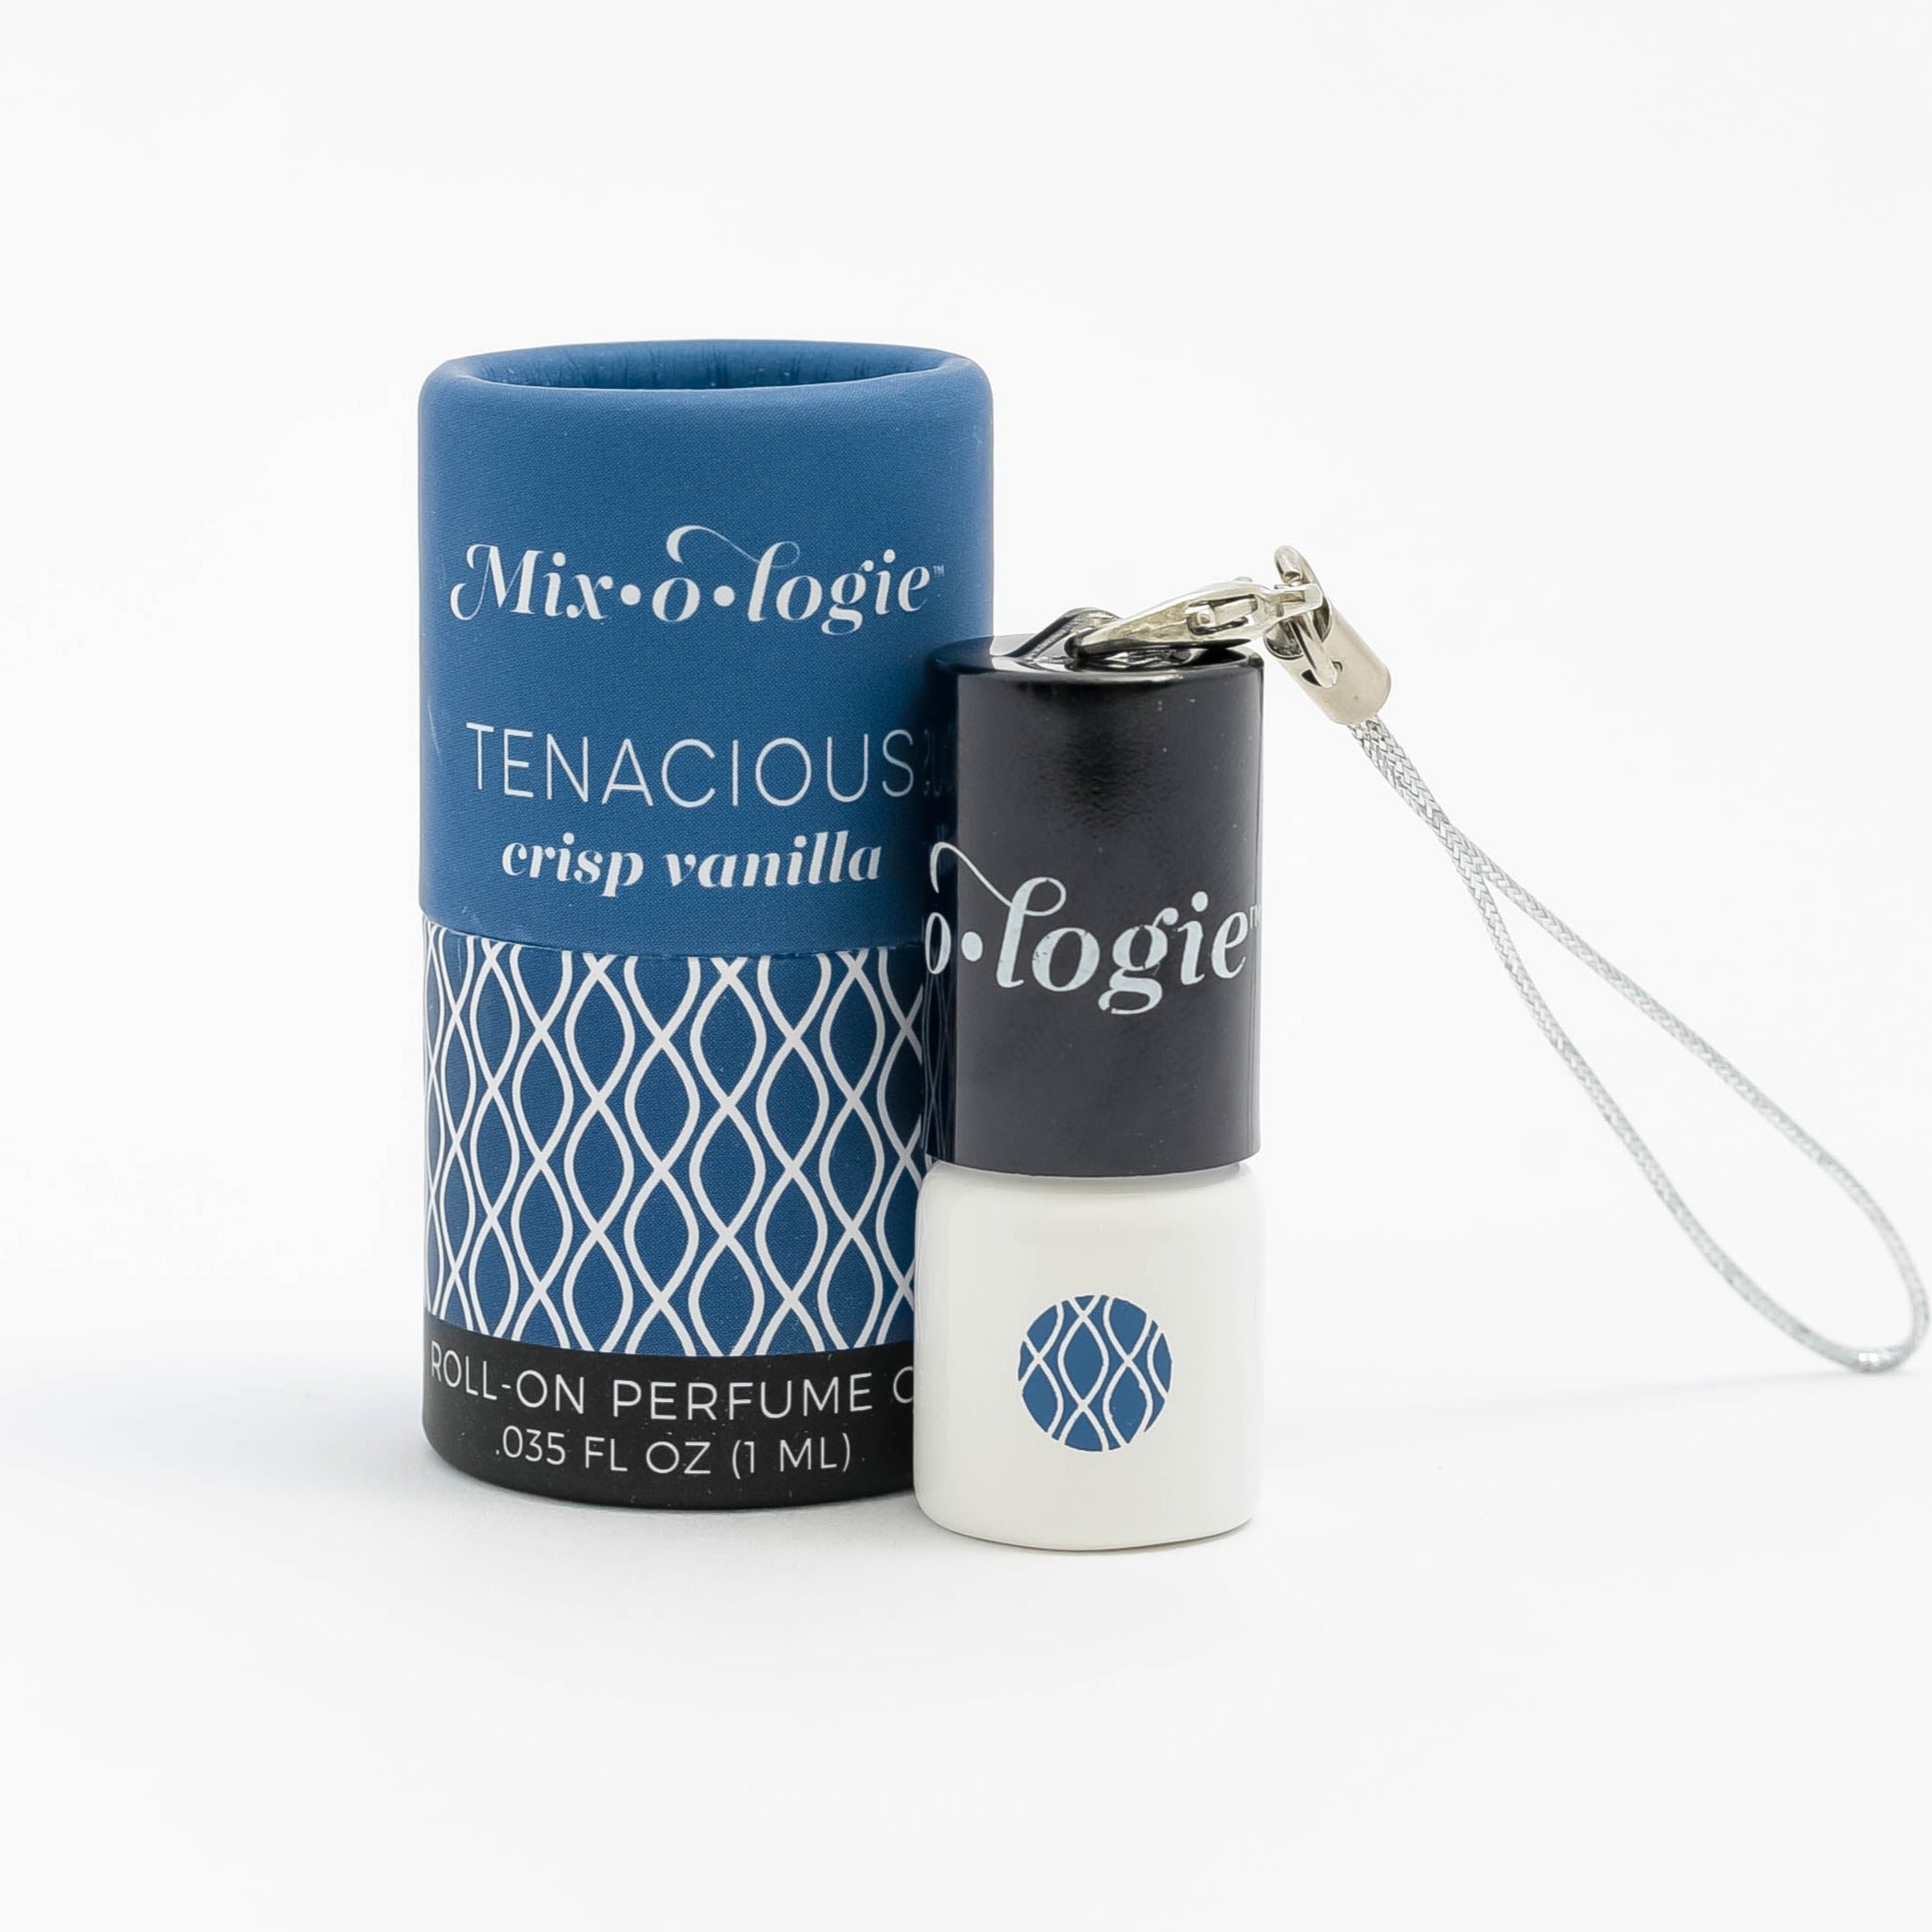 Mixologie's Tenacious (crisp vanilla) scented mini rollerball in 1 mL bottle with keychain lid. Displayed with cylinder packaging.